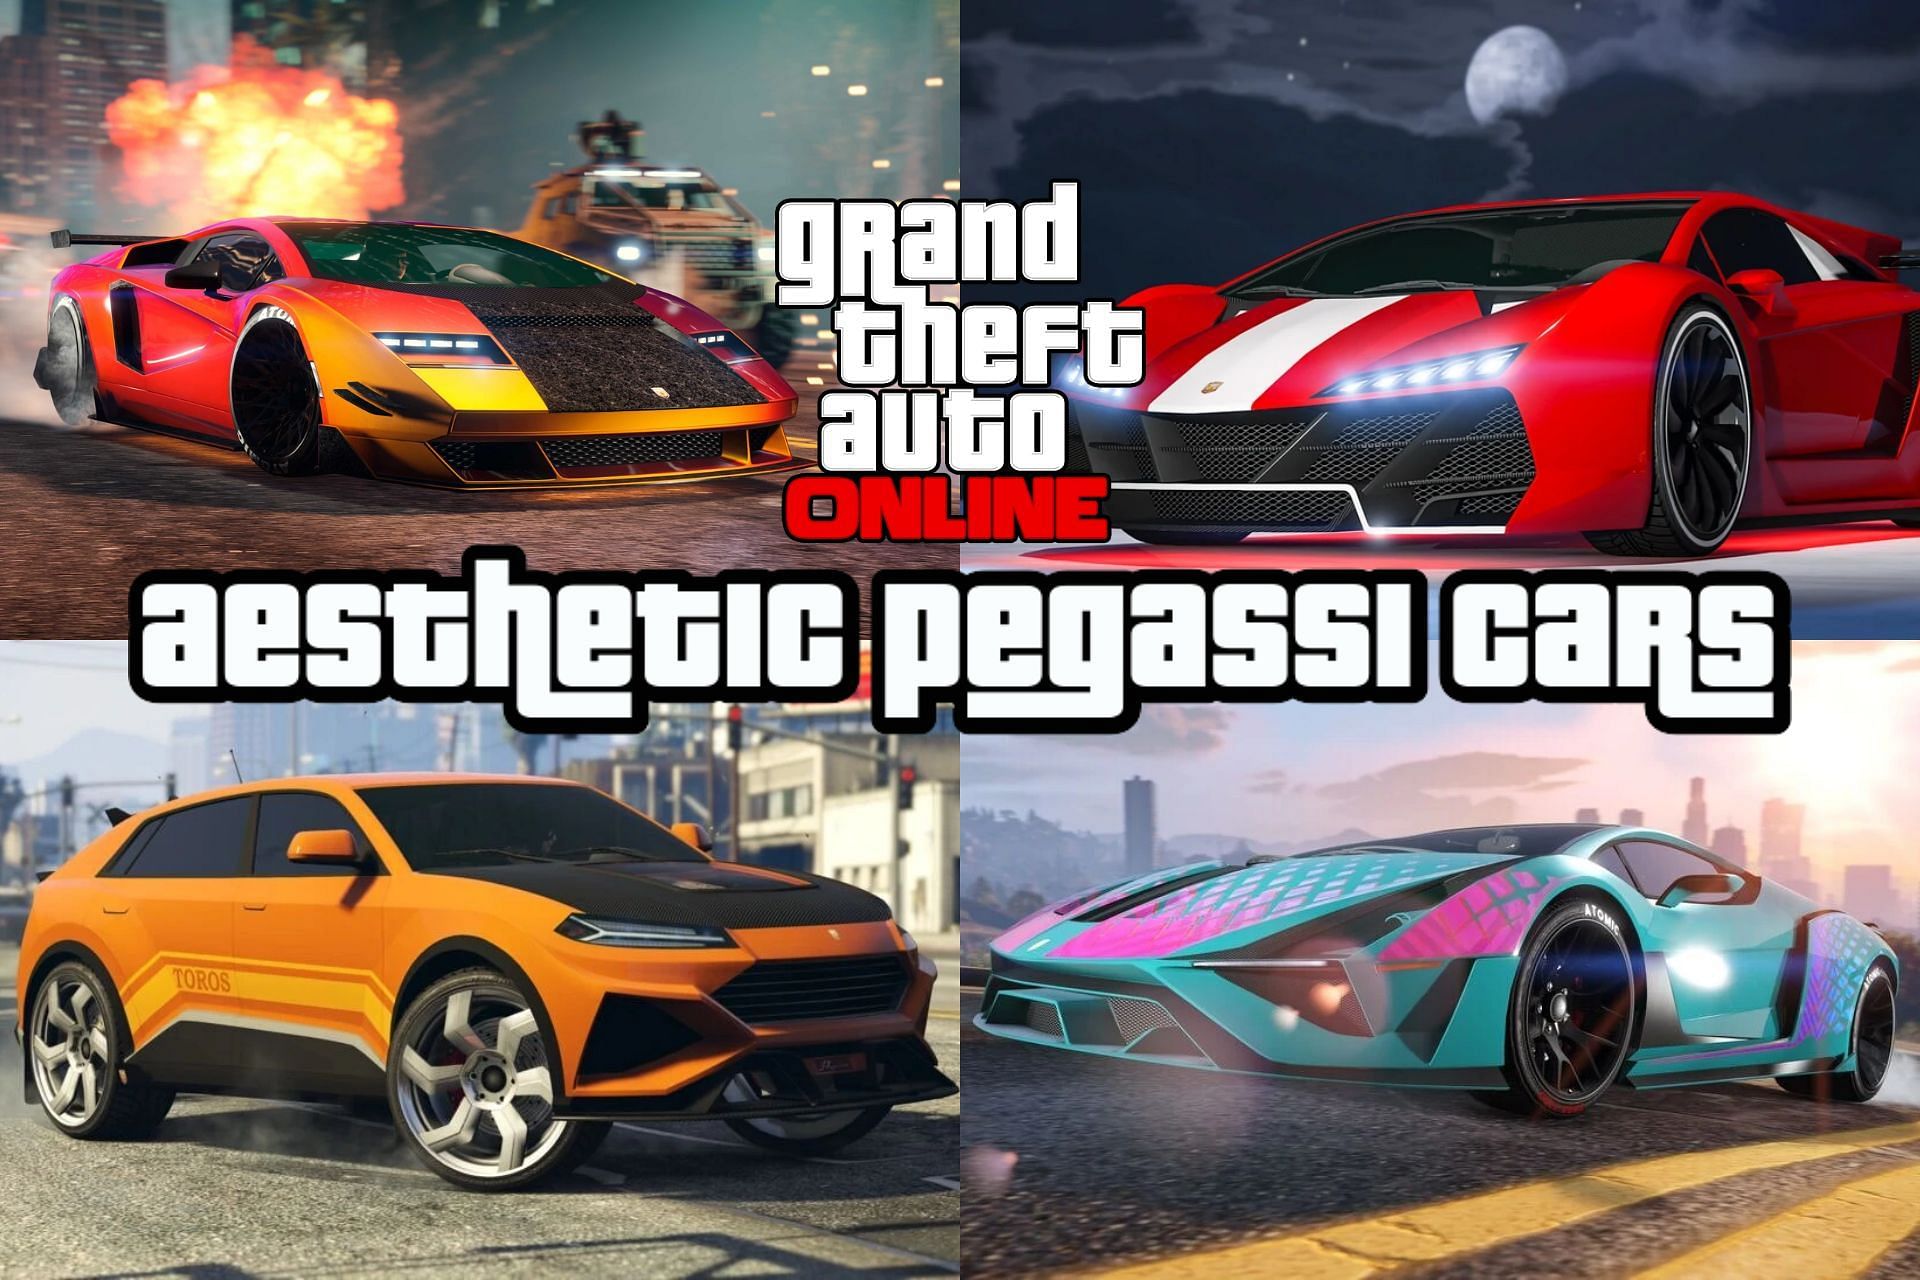 5 most aesthetic Pegassi cars in GTA Online and their real-life counterparts